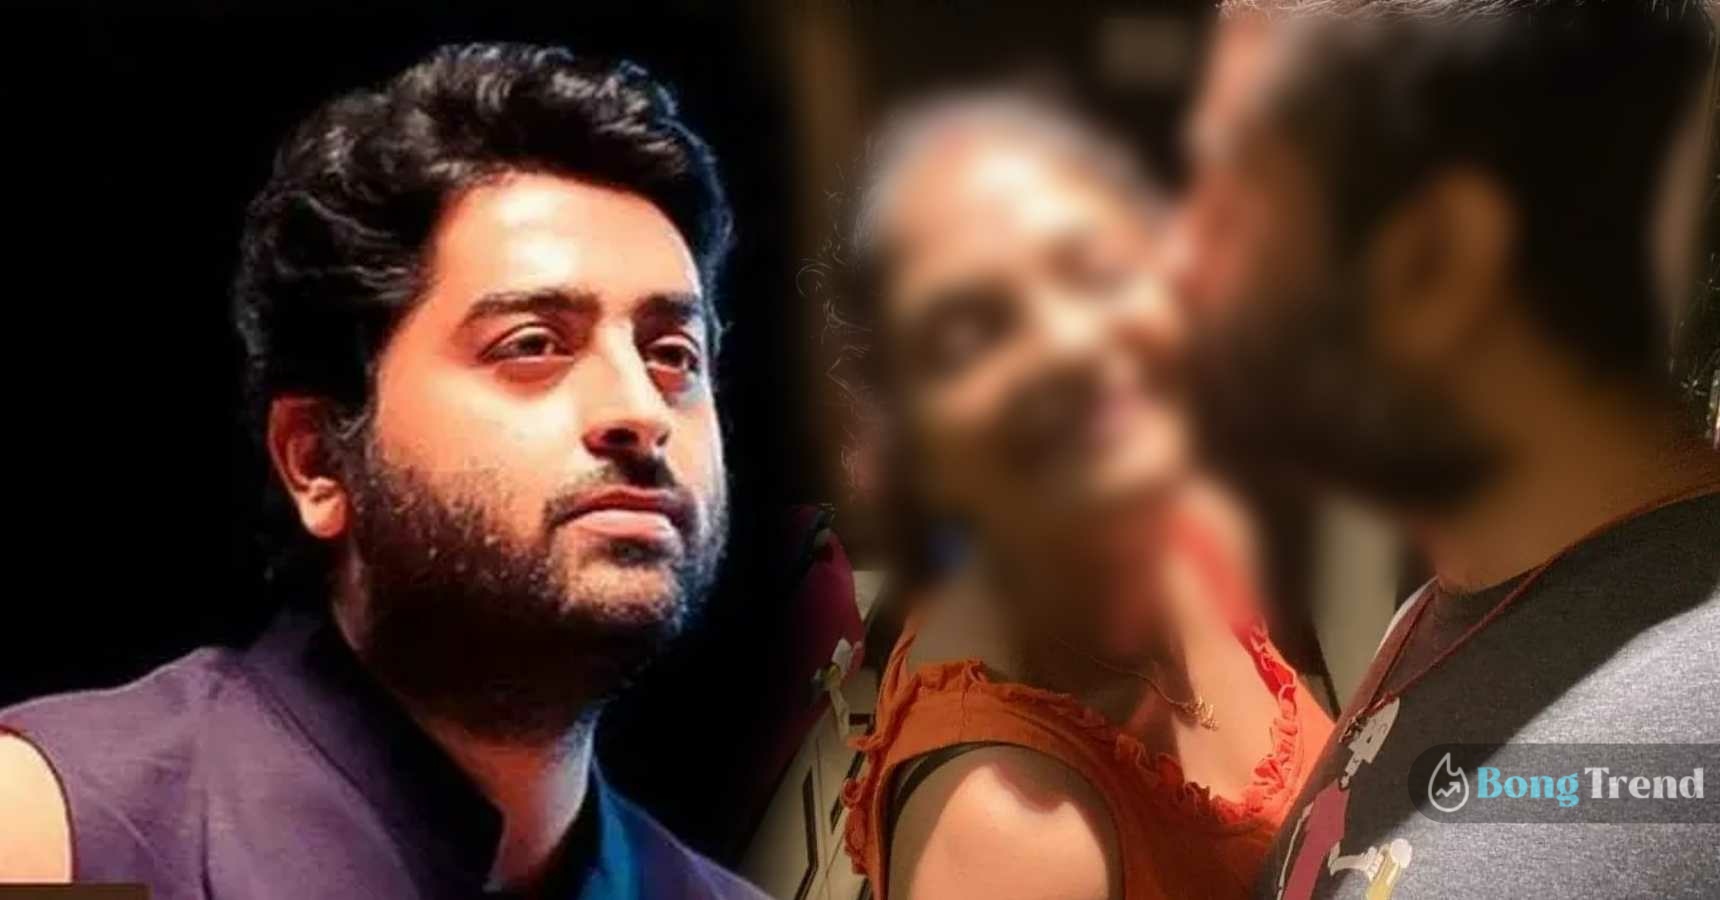 Arijit Singh personal photo goes viral on social media fans got angry